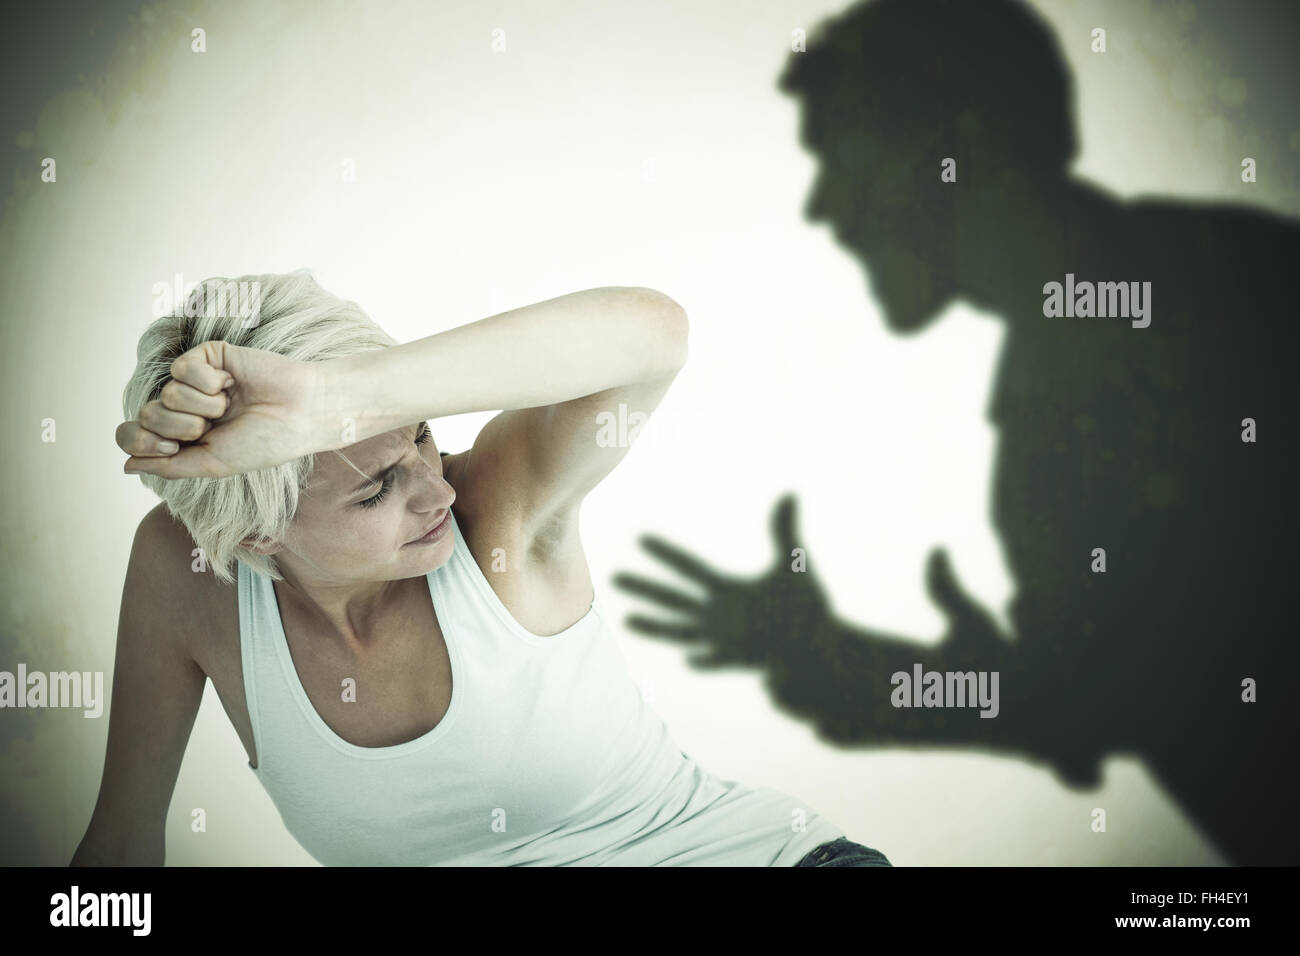 Composite image of depressed woman on the floor Stock Photo